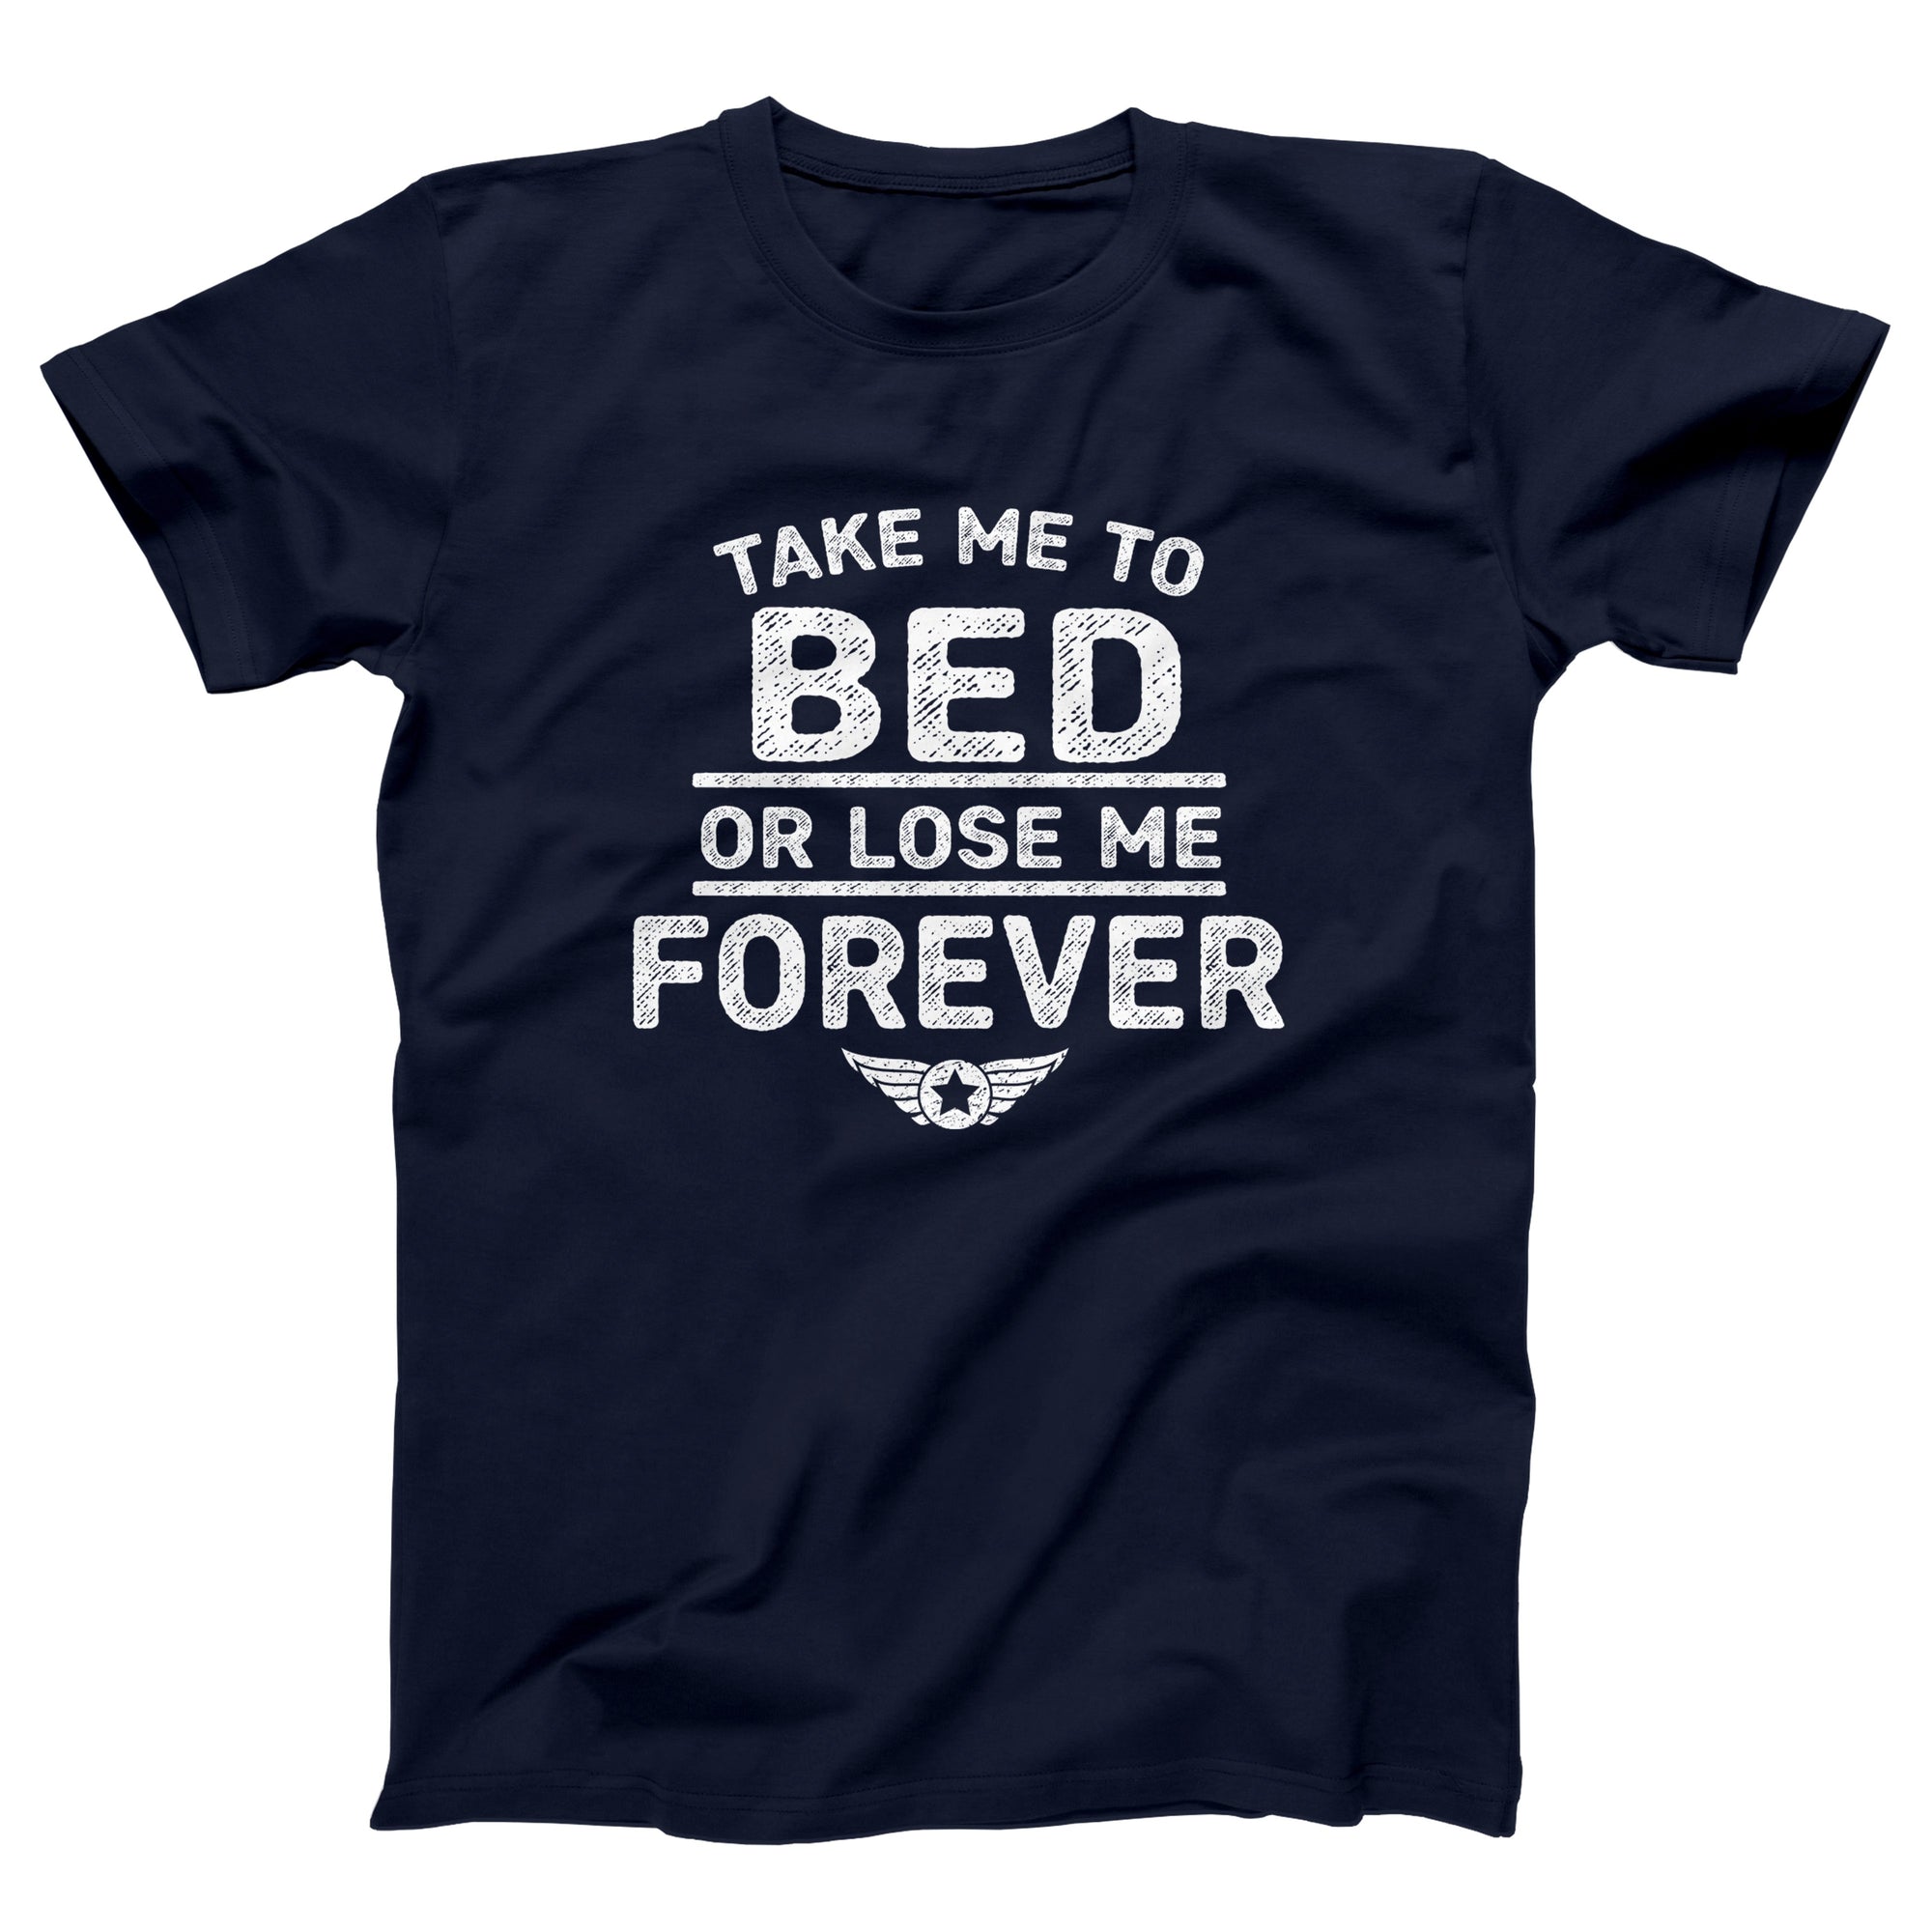 Take Me To Bed Or Lose Me Forever Adult Unisex T-Shirt - Twisted Gorilla